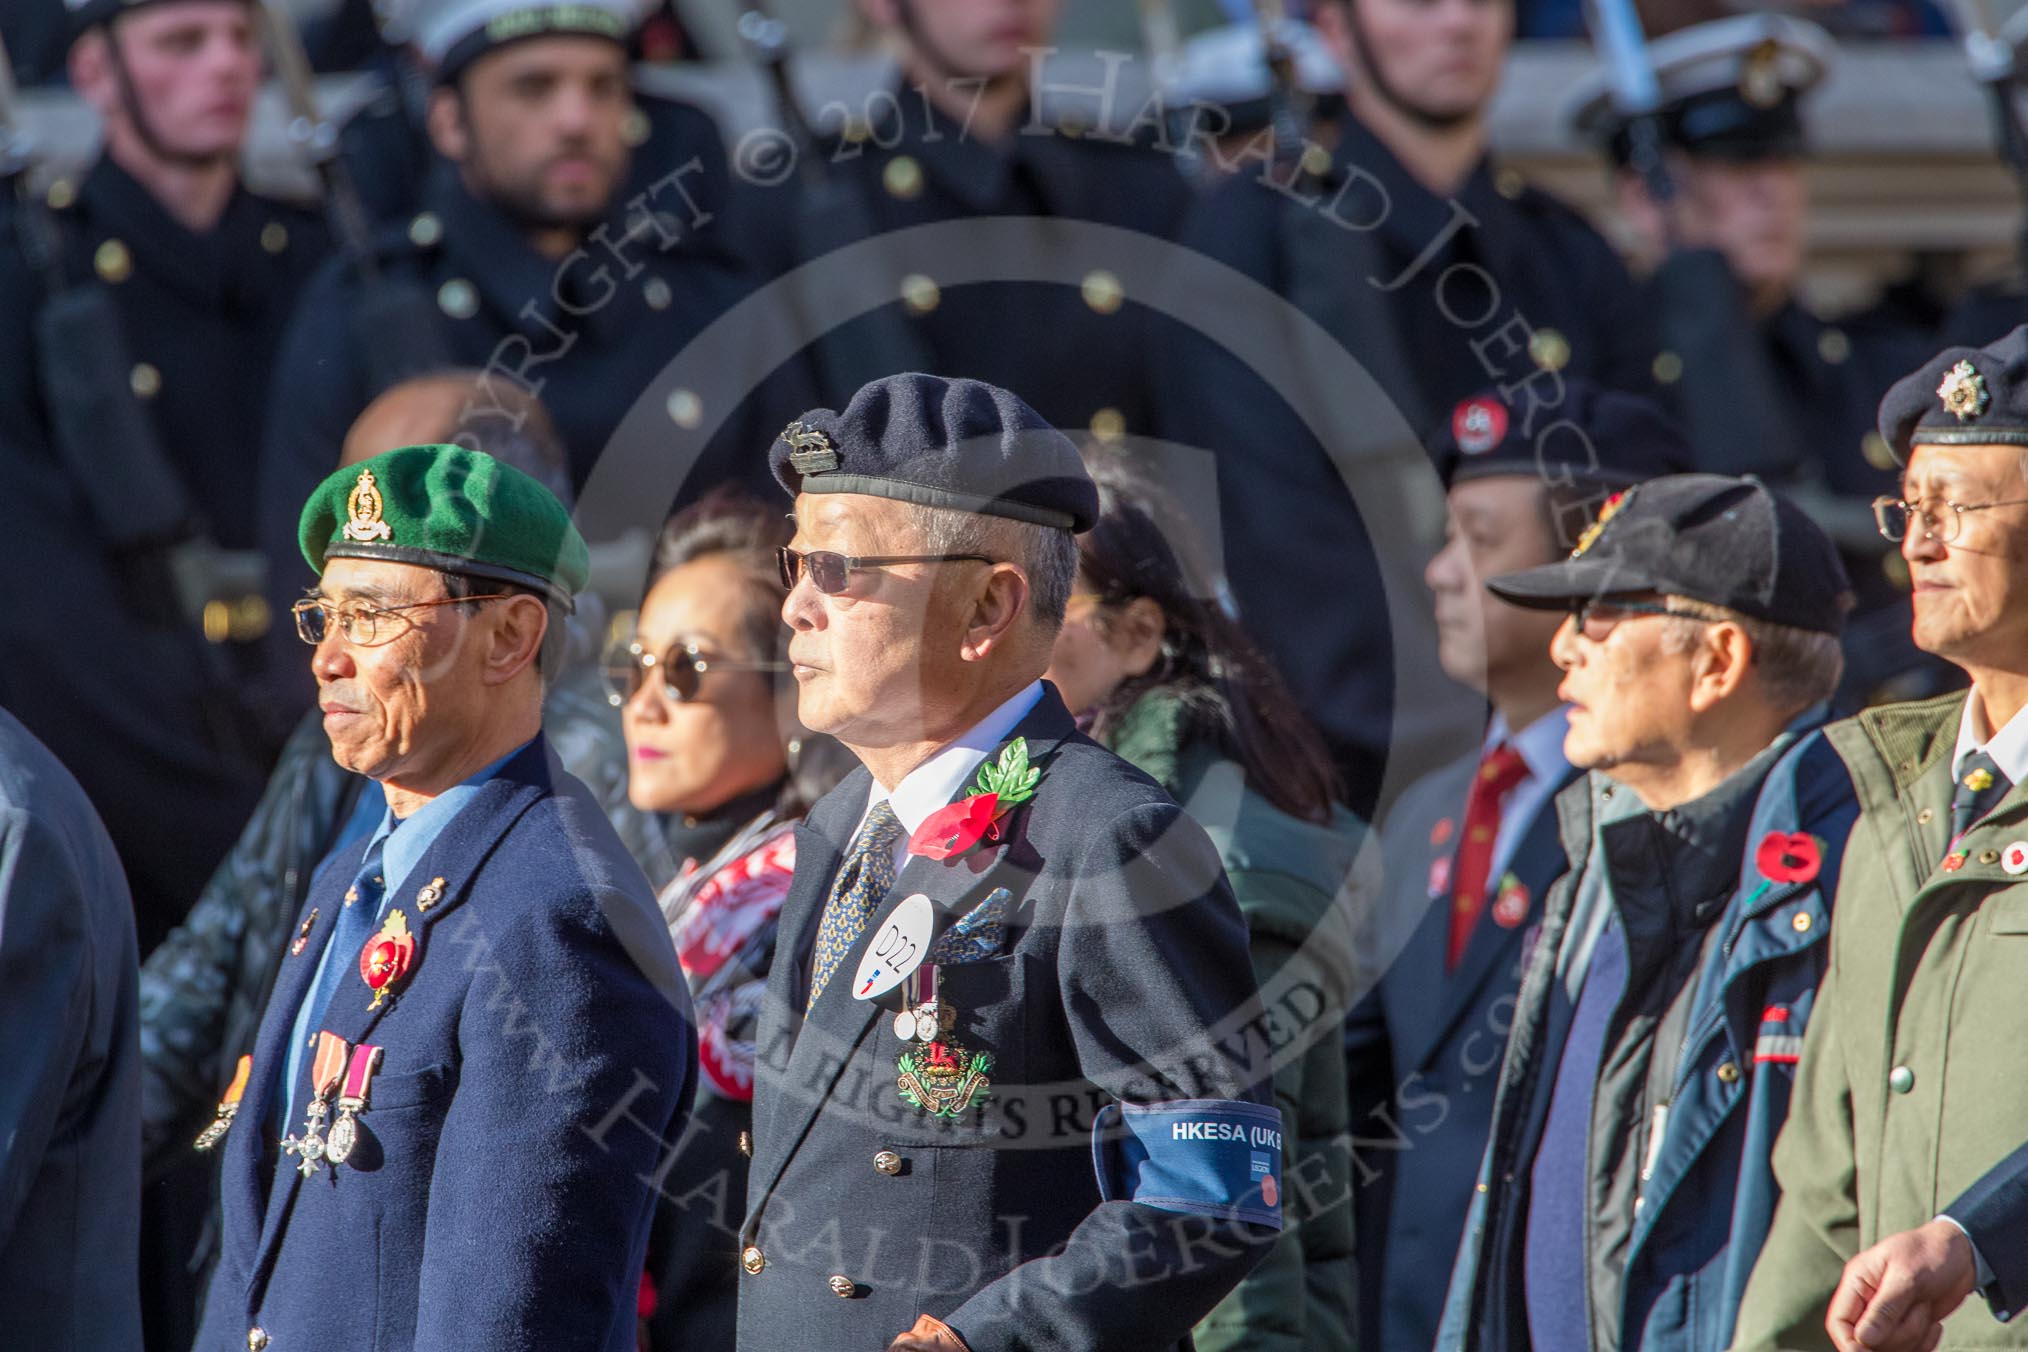 The Hong Kong Ex-Servicemen's Association  (UK Branch) (Group D22, 24 members) during the Royal British Legion March Past on Remembrance Sunday at the Cenotaph, Whitehall, Westminster, London, 11 November 2018, 12:24.